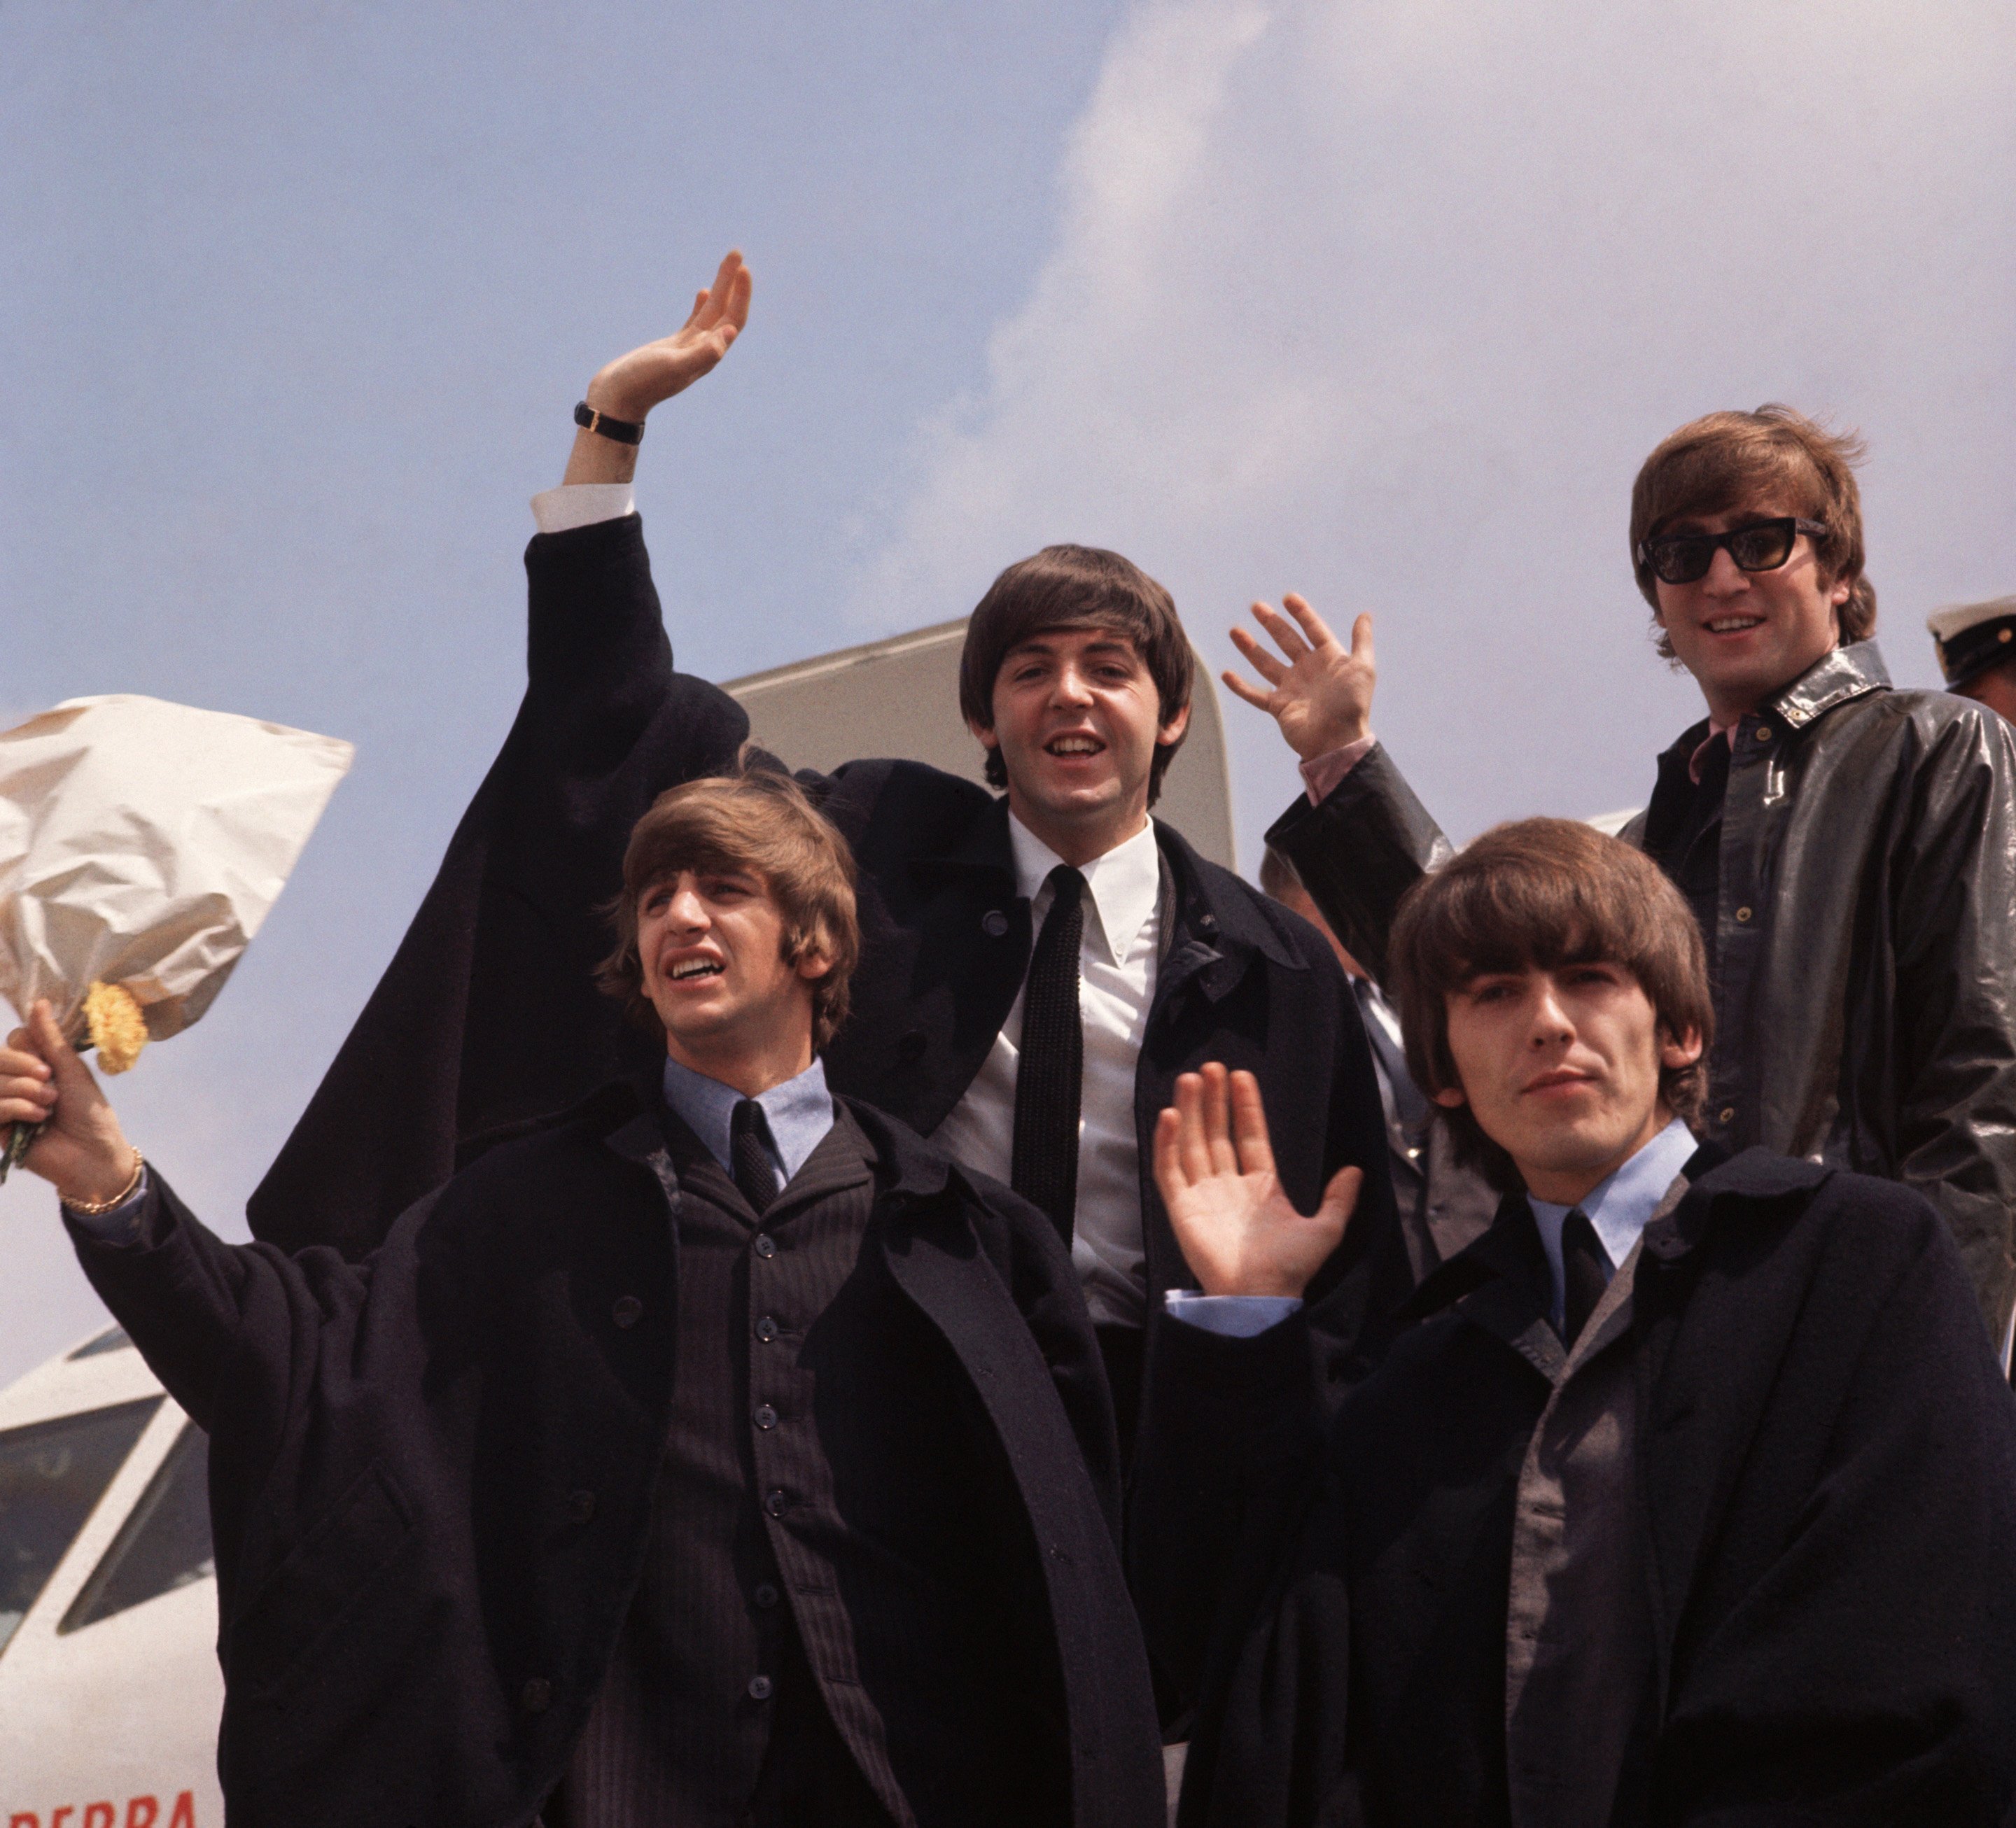 The Beatles, John Lennon, George Harrison, Paul McCartney, and Ringo Starr, pictured on their arrival in London following a tour